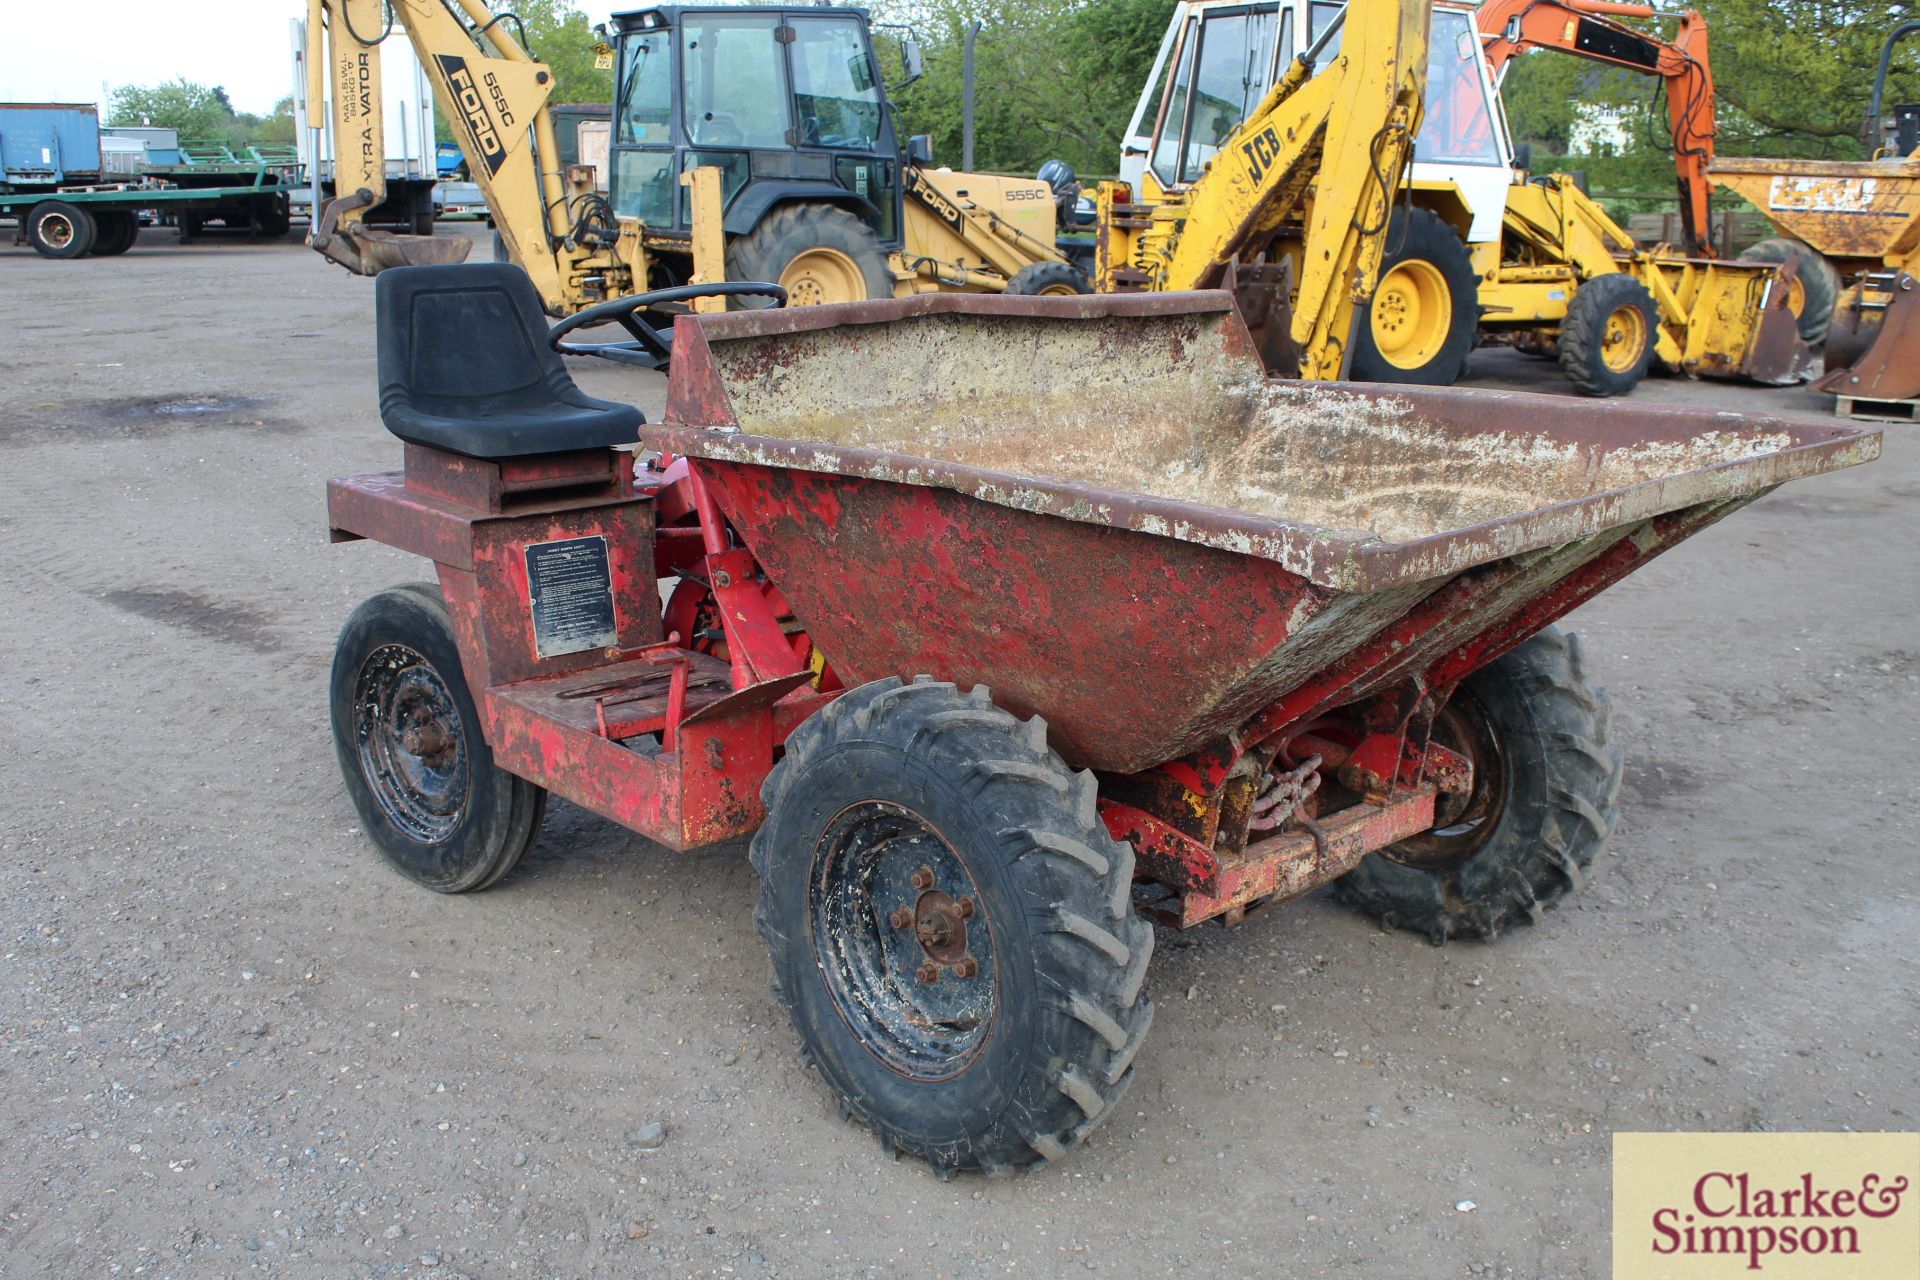 Winget 1.5T 2WD dumper. With Petter PH1 diesel engine and hydraulic tip.